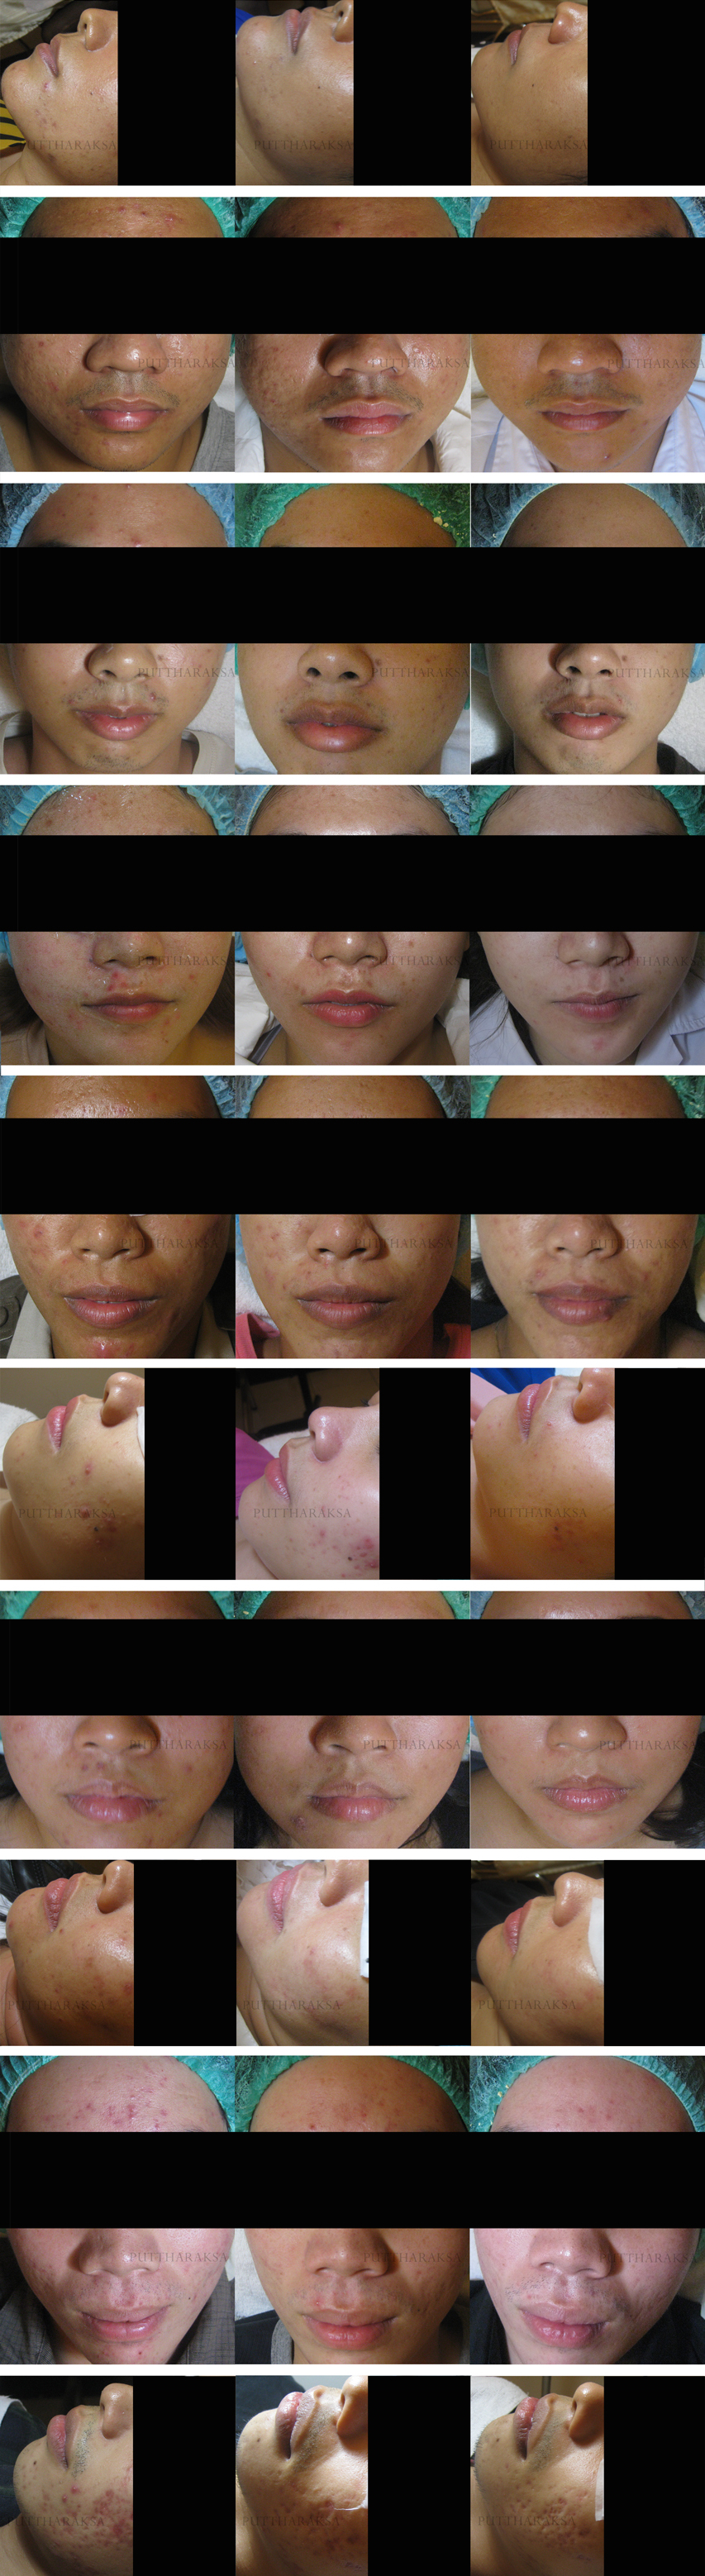 acne treatment bangkok before and after